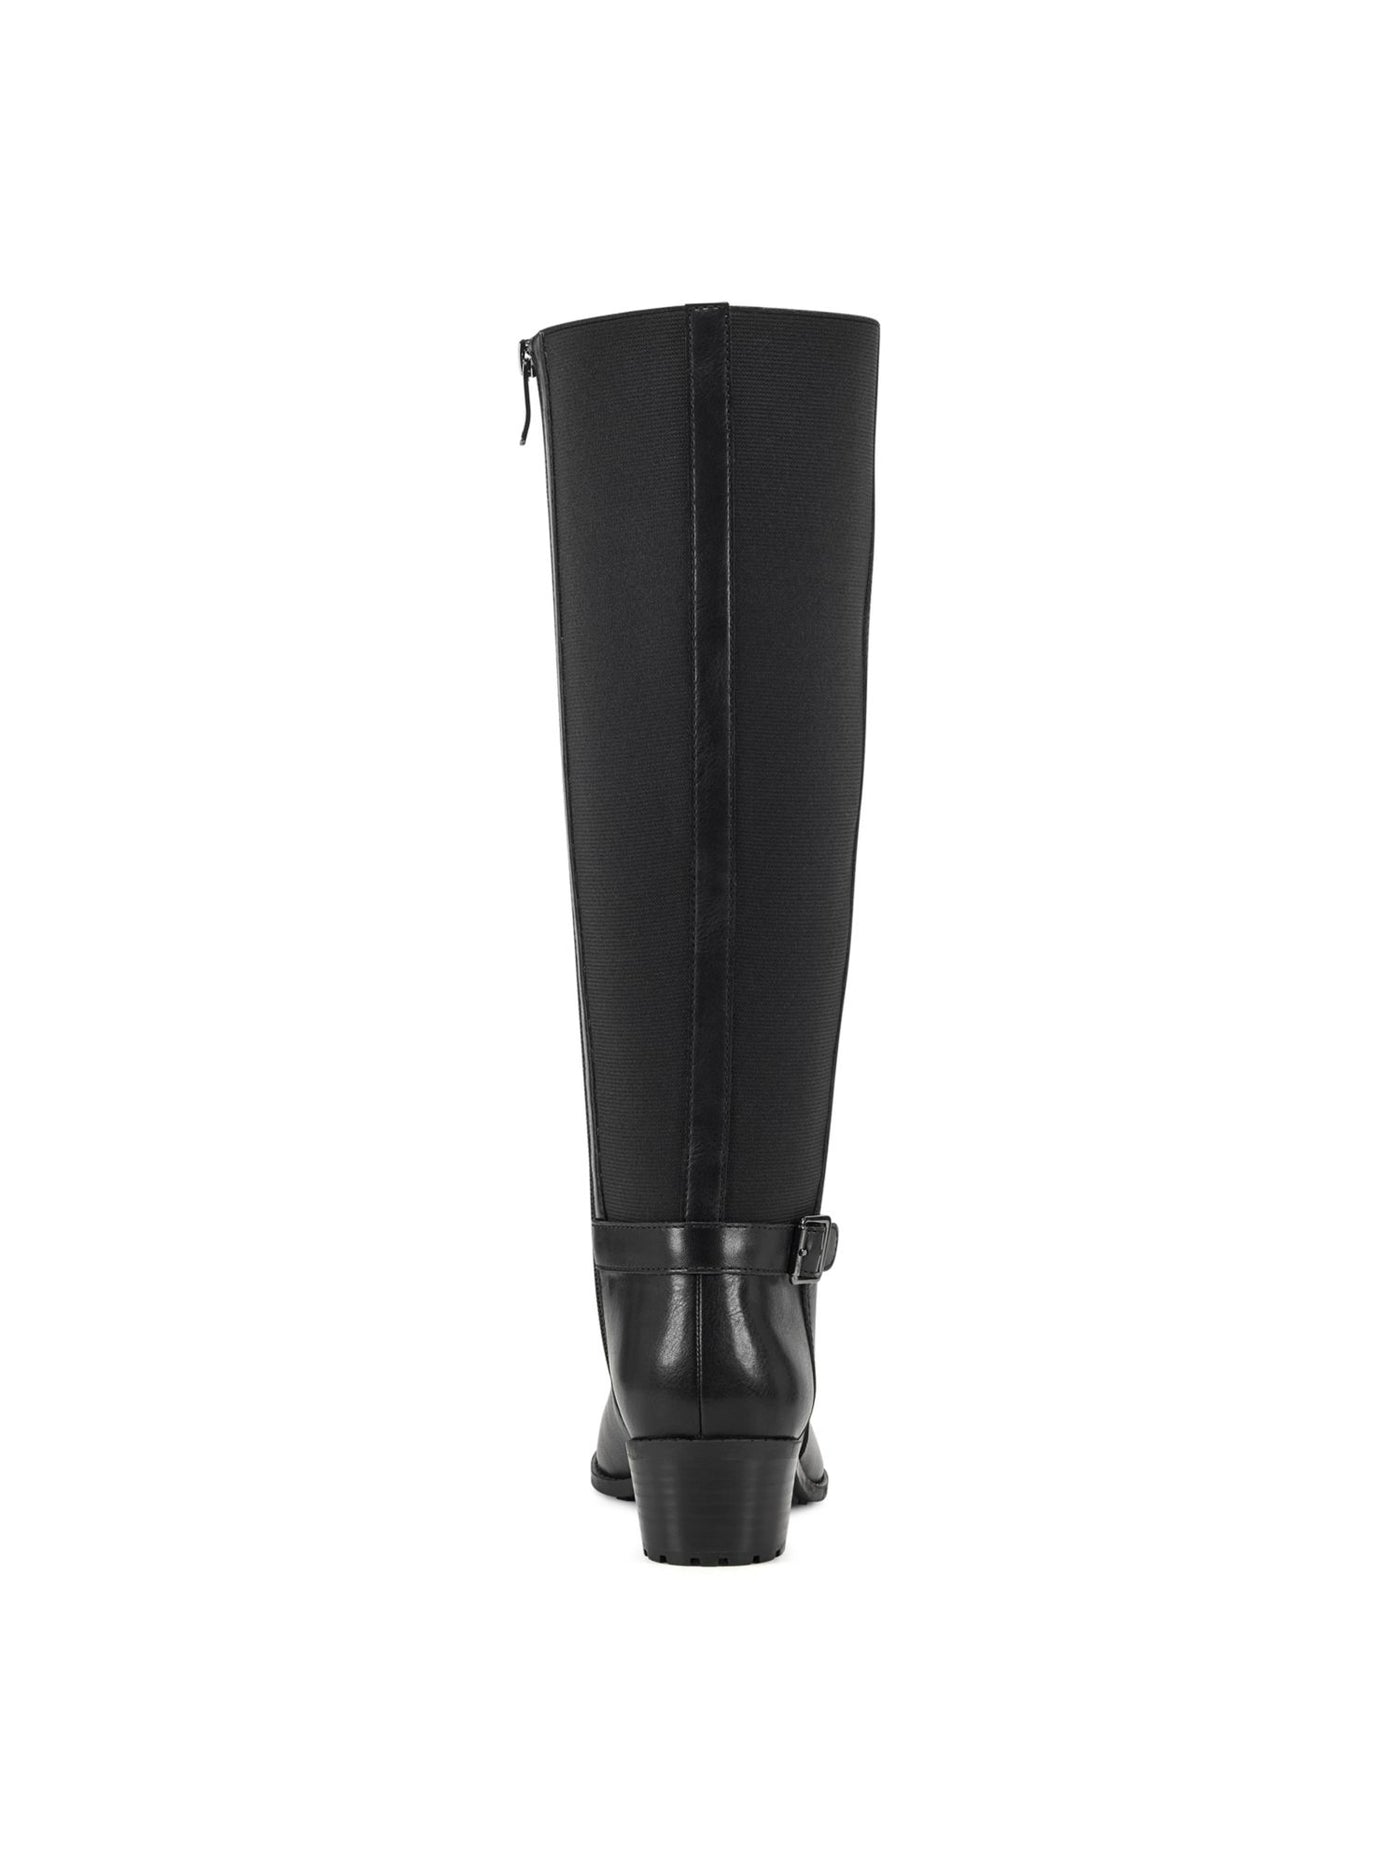 EASY SPIRIT Womens Black Cushioned Arch Support Chaza Round Toe Block Heel Riding Boot 6 M WC